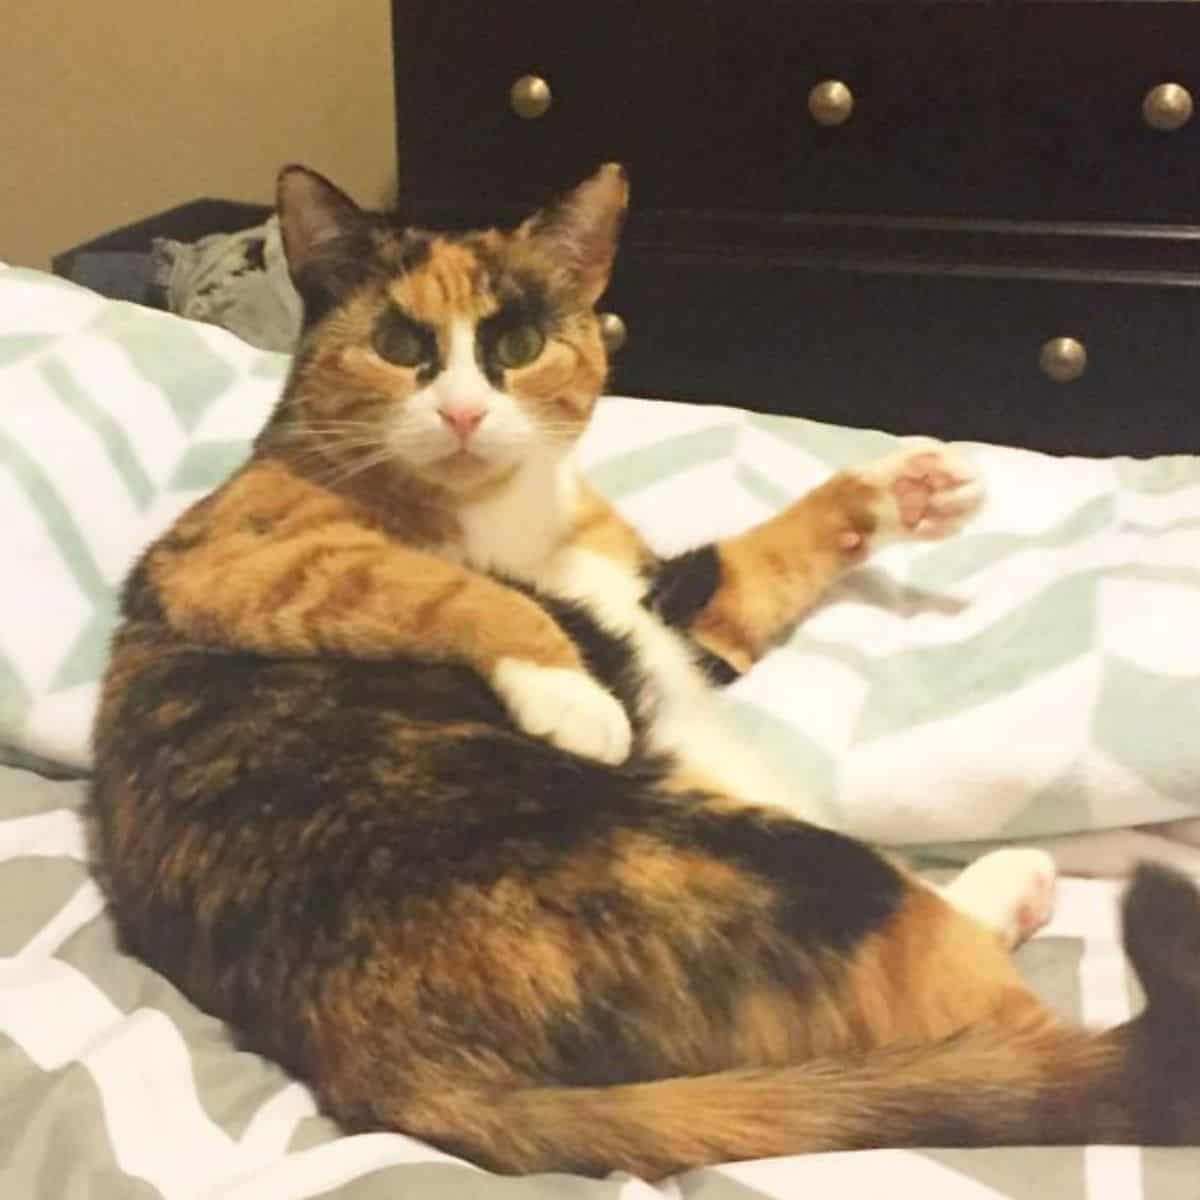 a cat with the most unusual eyebrows is lying on the bed